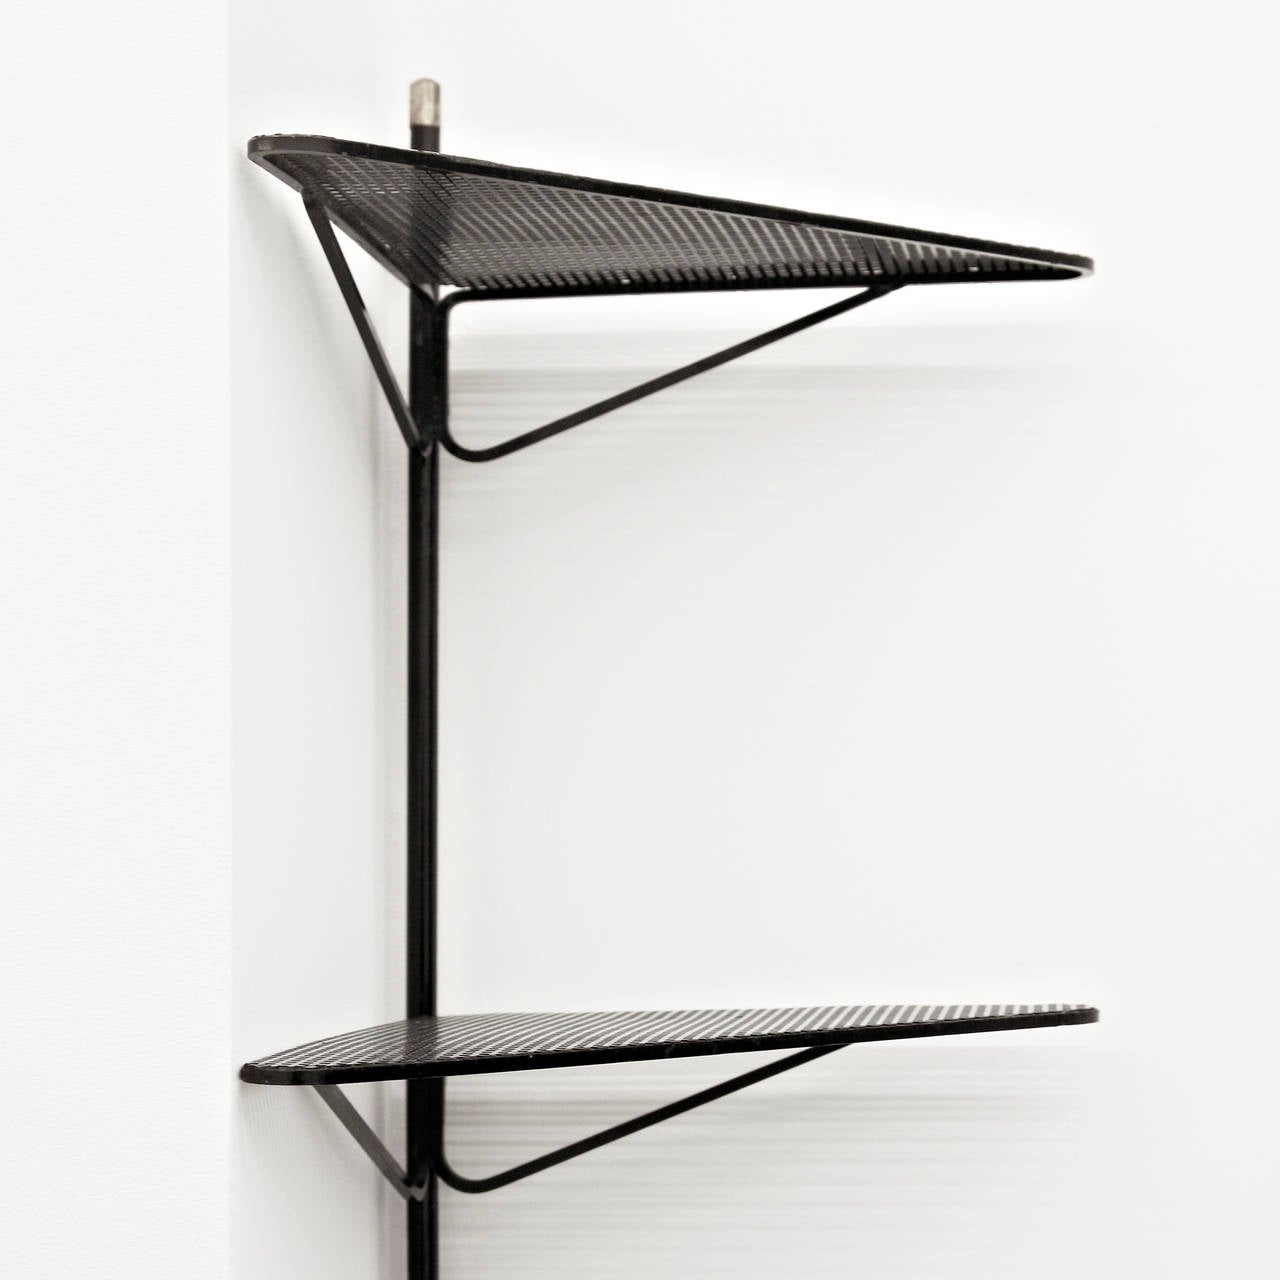 Corner Shelf designed by Mathieu Matégot.
Manufactured by Ateliers Matégot (France) circa 1950.
Lacquered perforated metal with original paint.

In good original condition, with minor wear consistent with age and use, preserving a beautiful